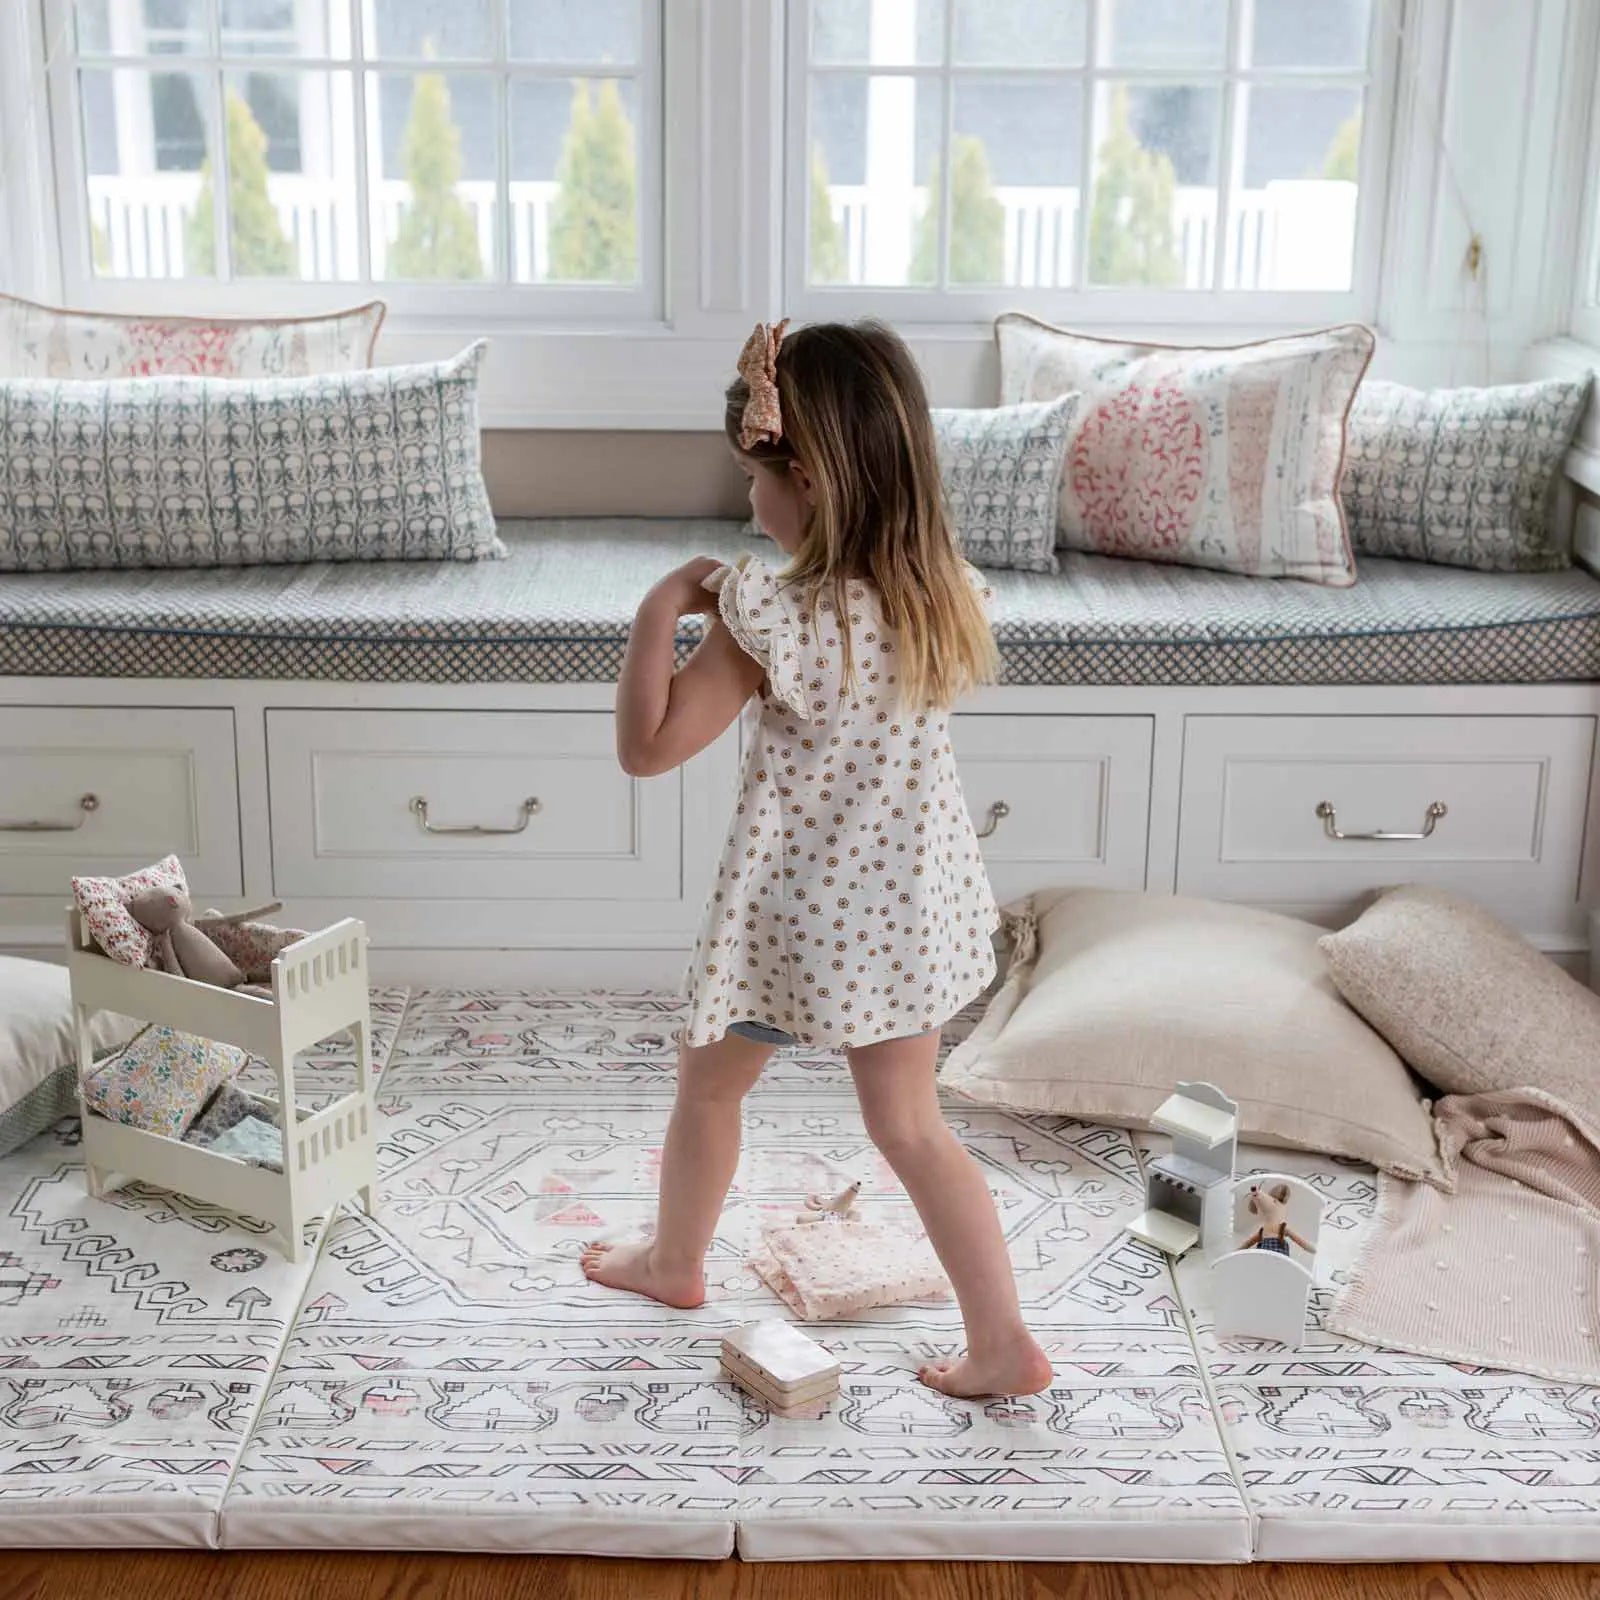 Aryla Shifting Sands cream and pink boho tumbling mat shown in front of a window seat with pillow and toys and little girl walking on the mat